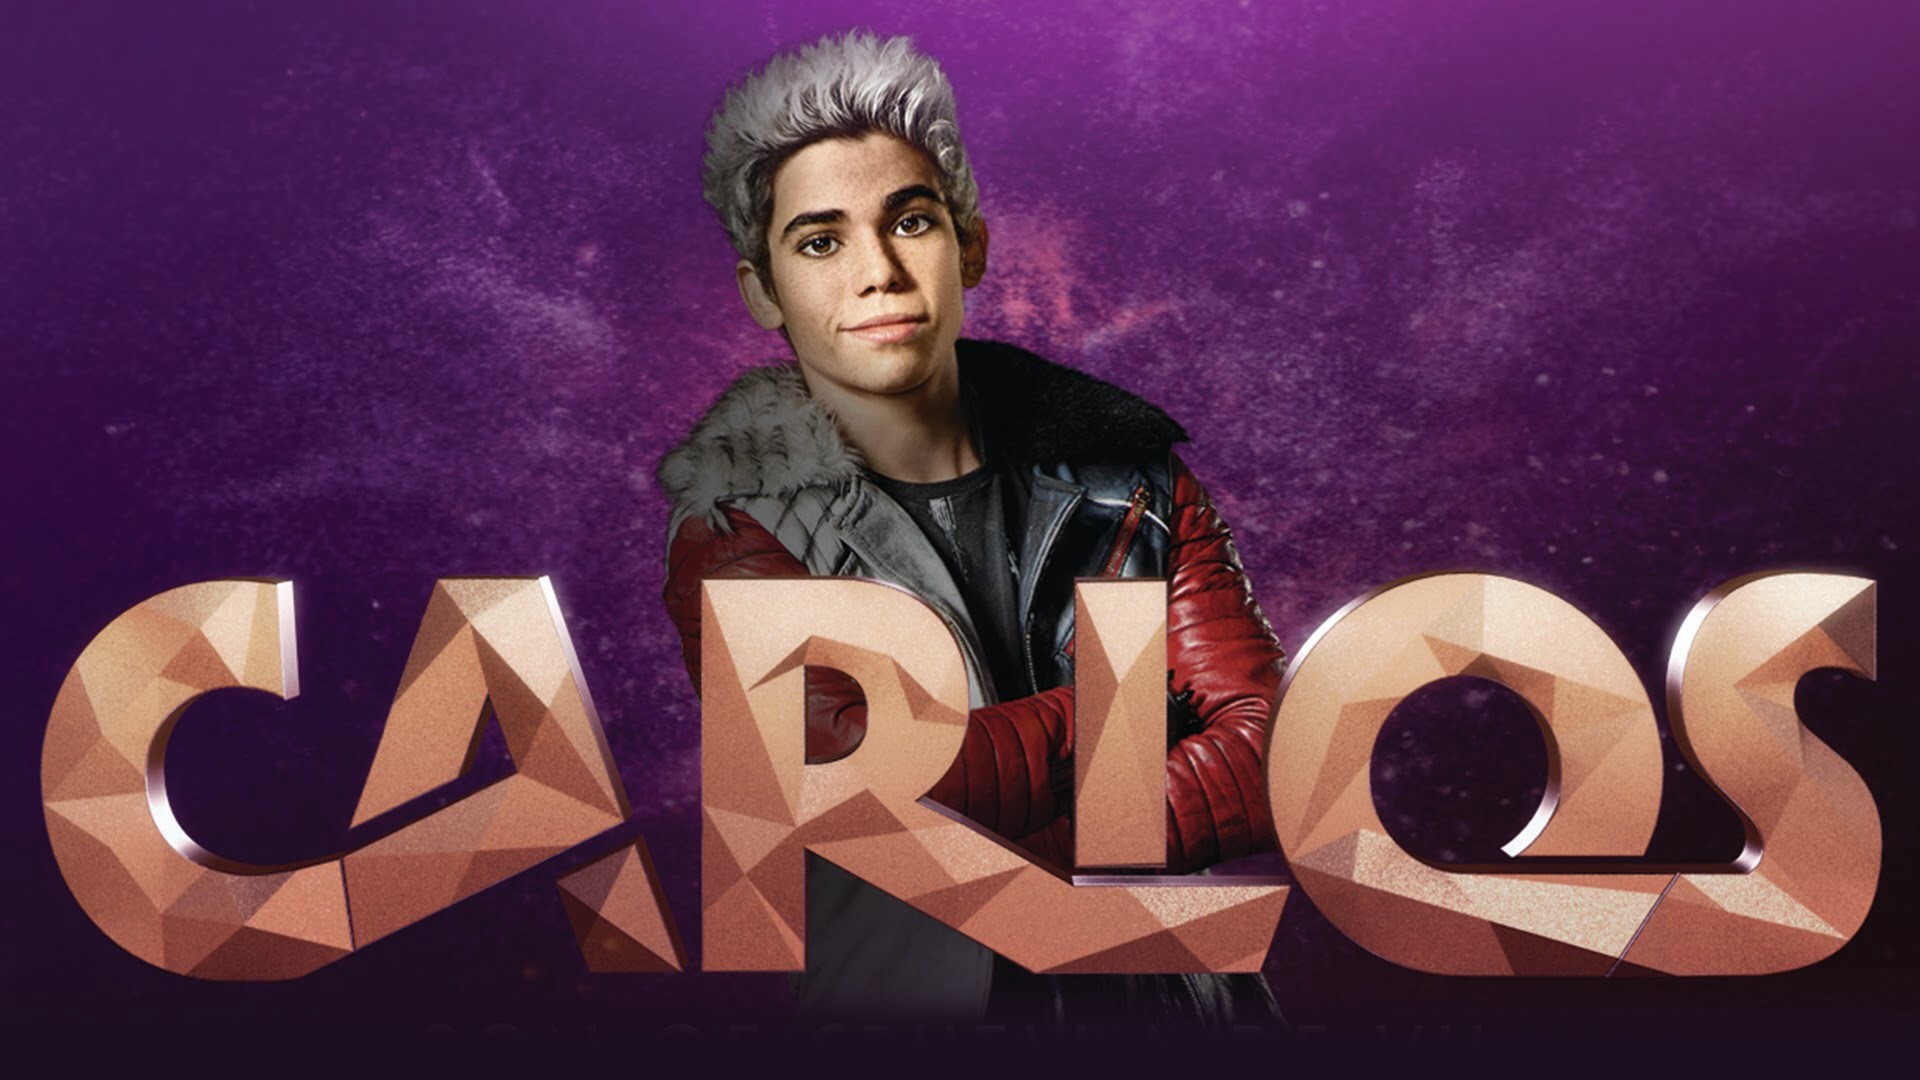 1920x1080 Descendants images Carlos HD wallpaper and background photos